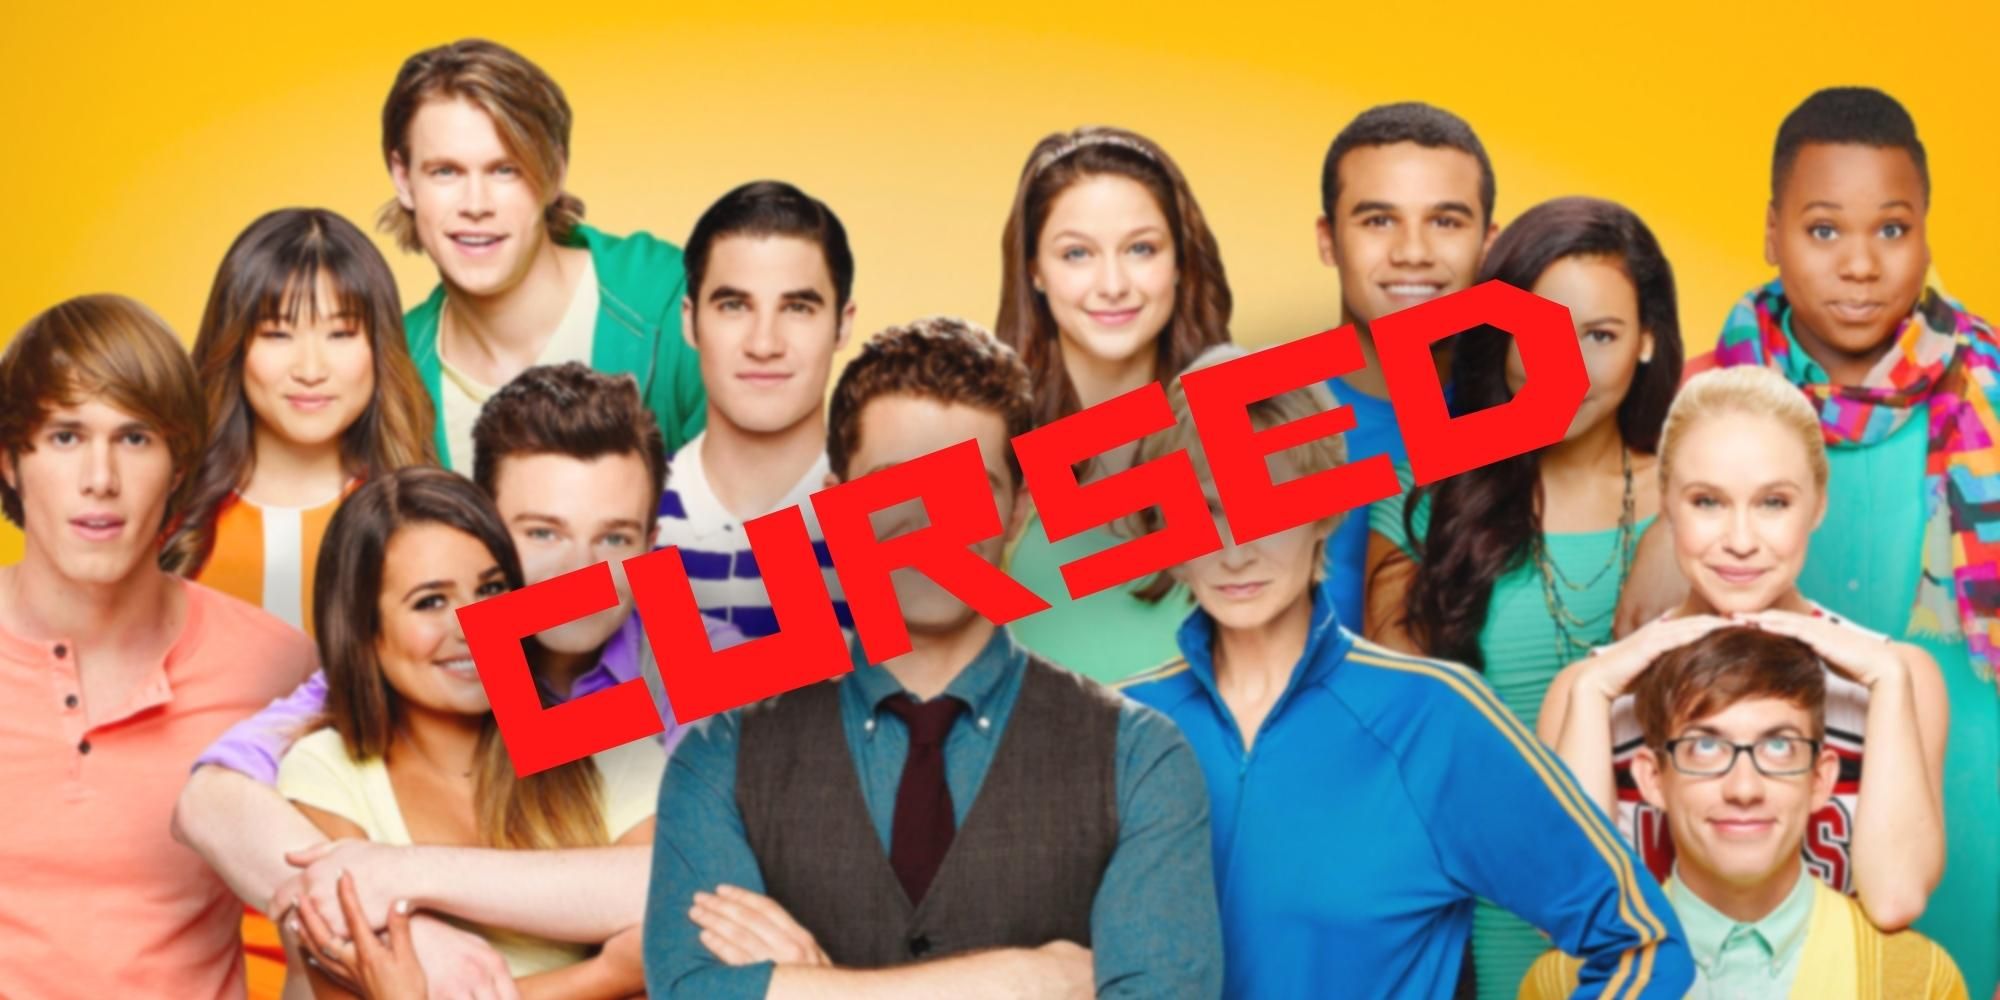 The Glee main cast posing with the word cursed in red across the image